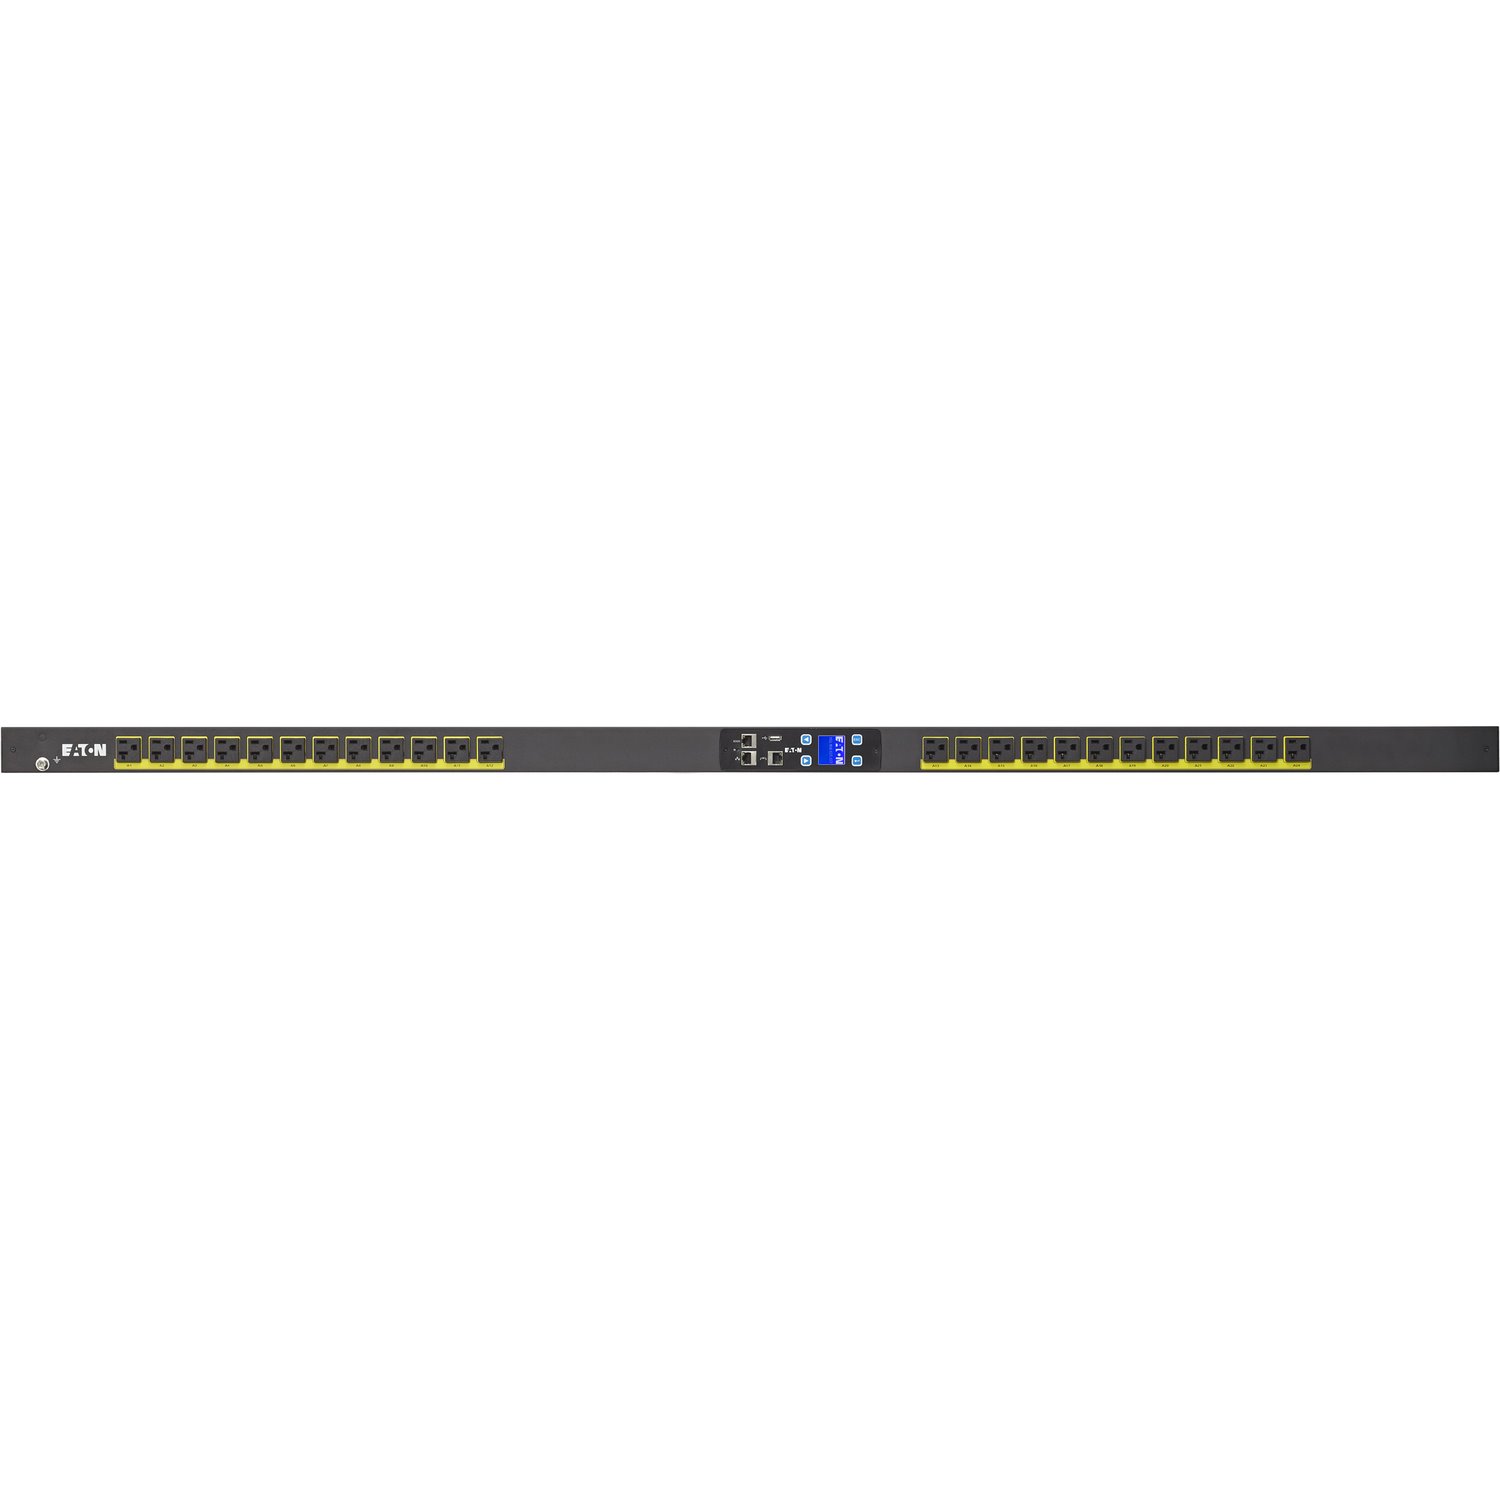 Eaton Metered Input rack PDU, 0U, 5-20P, L5-20P input, 1.92 kW max, 120V, 16A, 10 ft cord, Single-phase, Outlets: (24) 5-20R